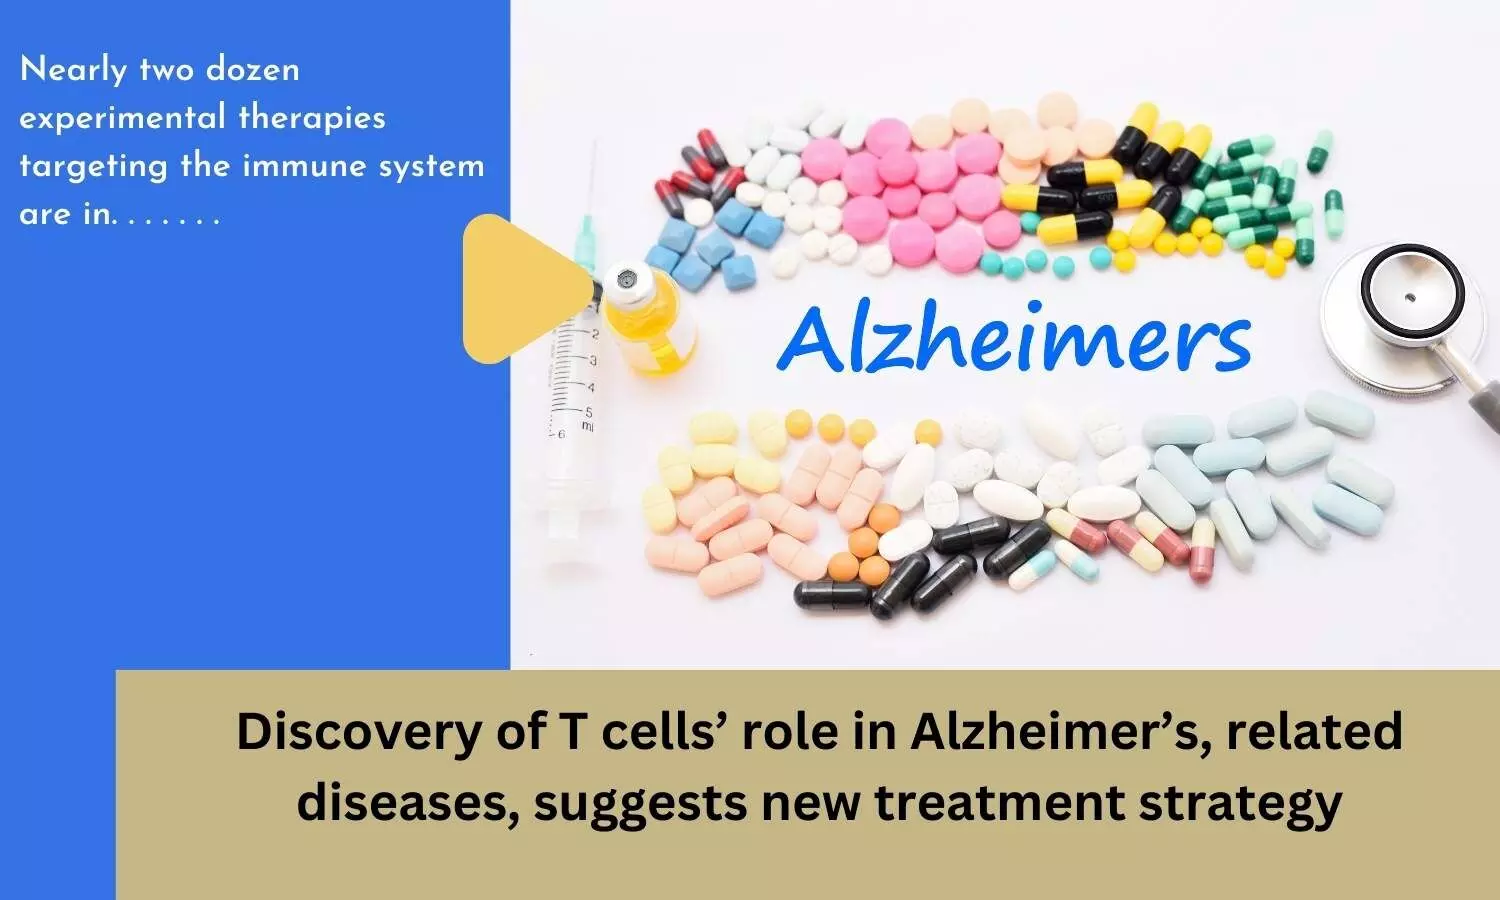 Discovery of T cells role in Alzheimers, related diseases, suggests new treatment strategy